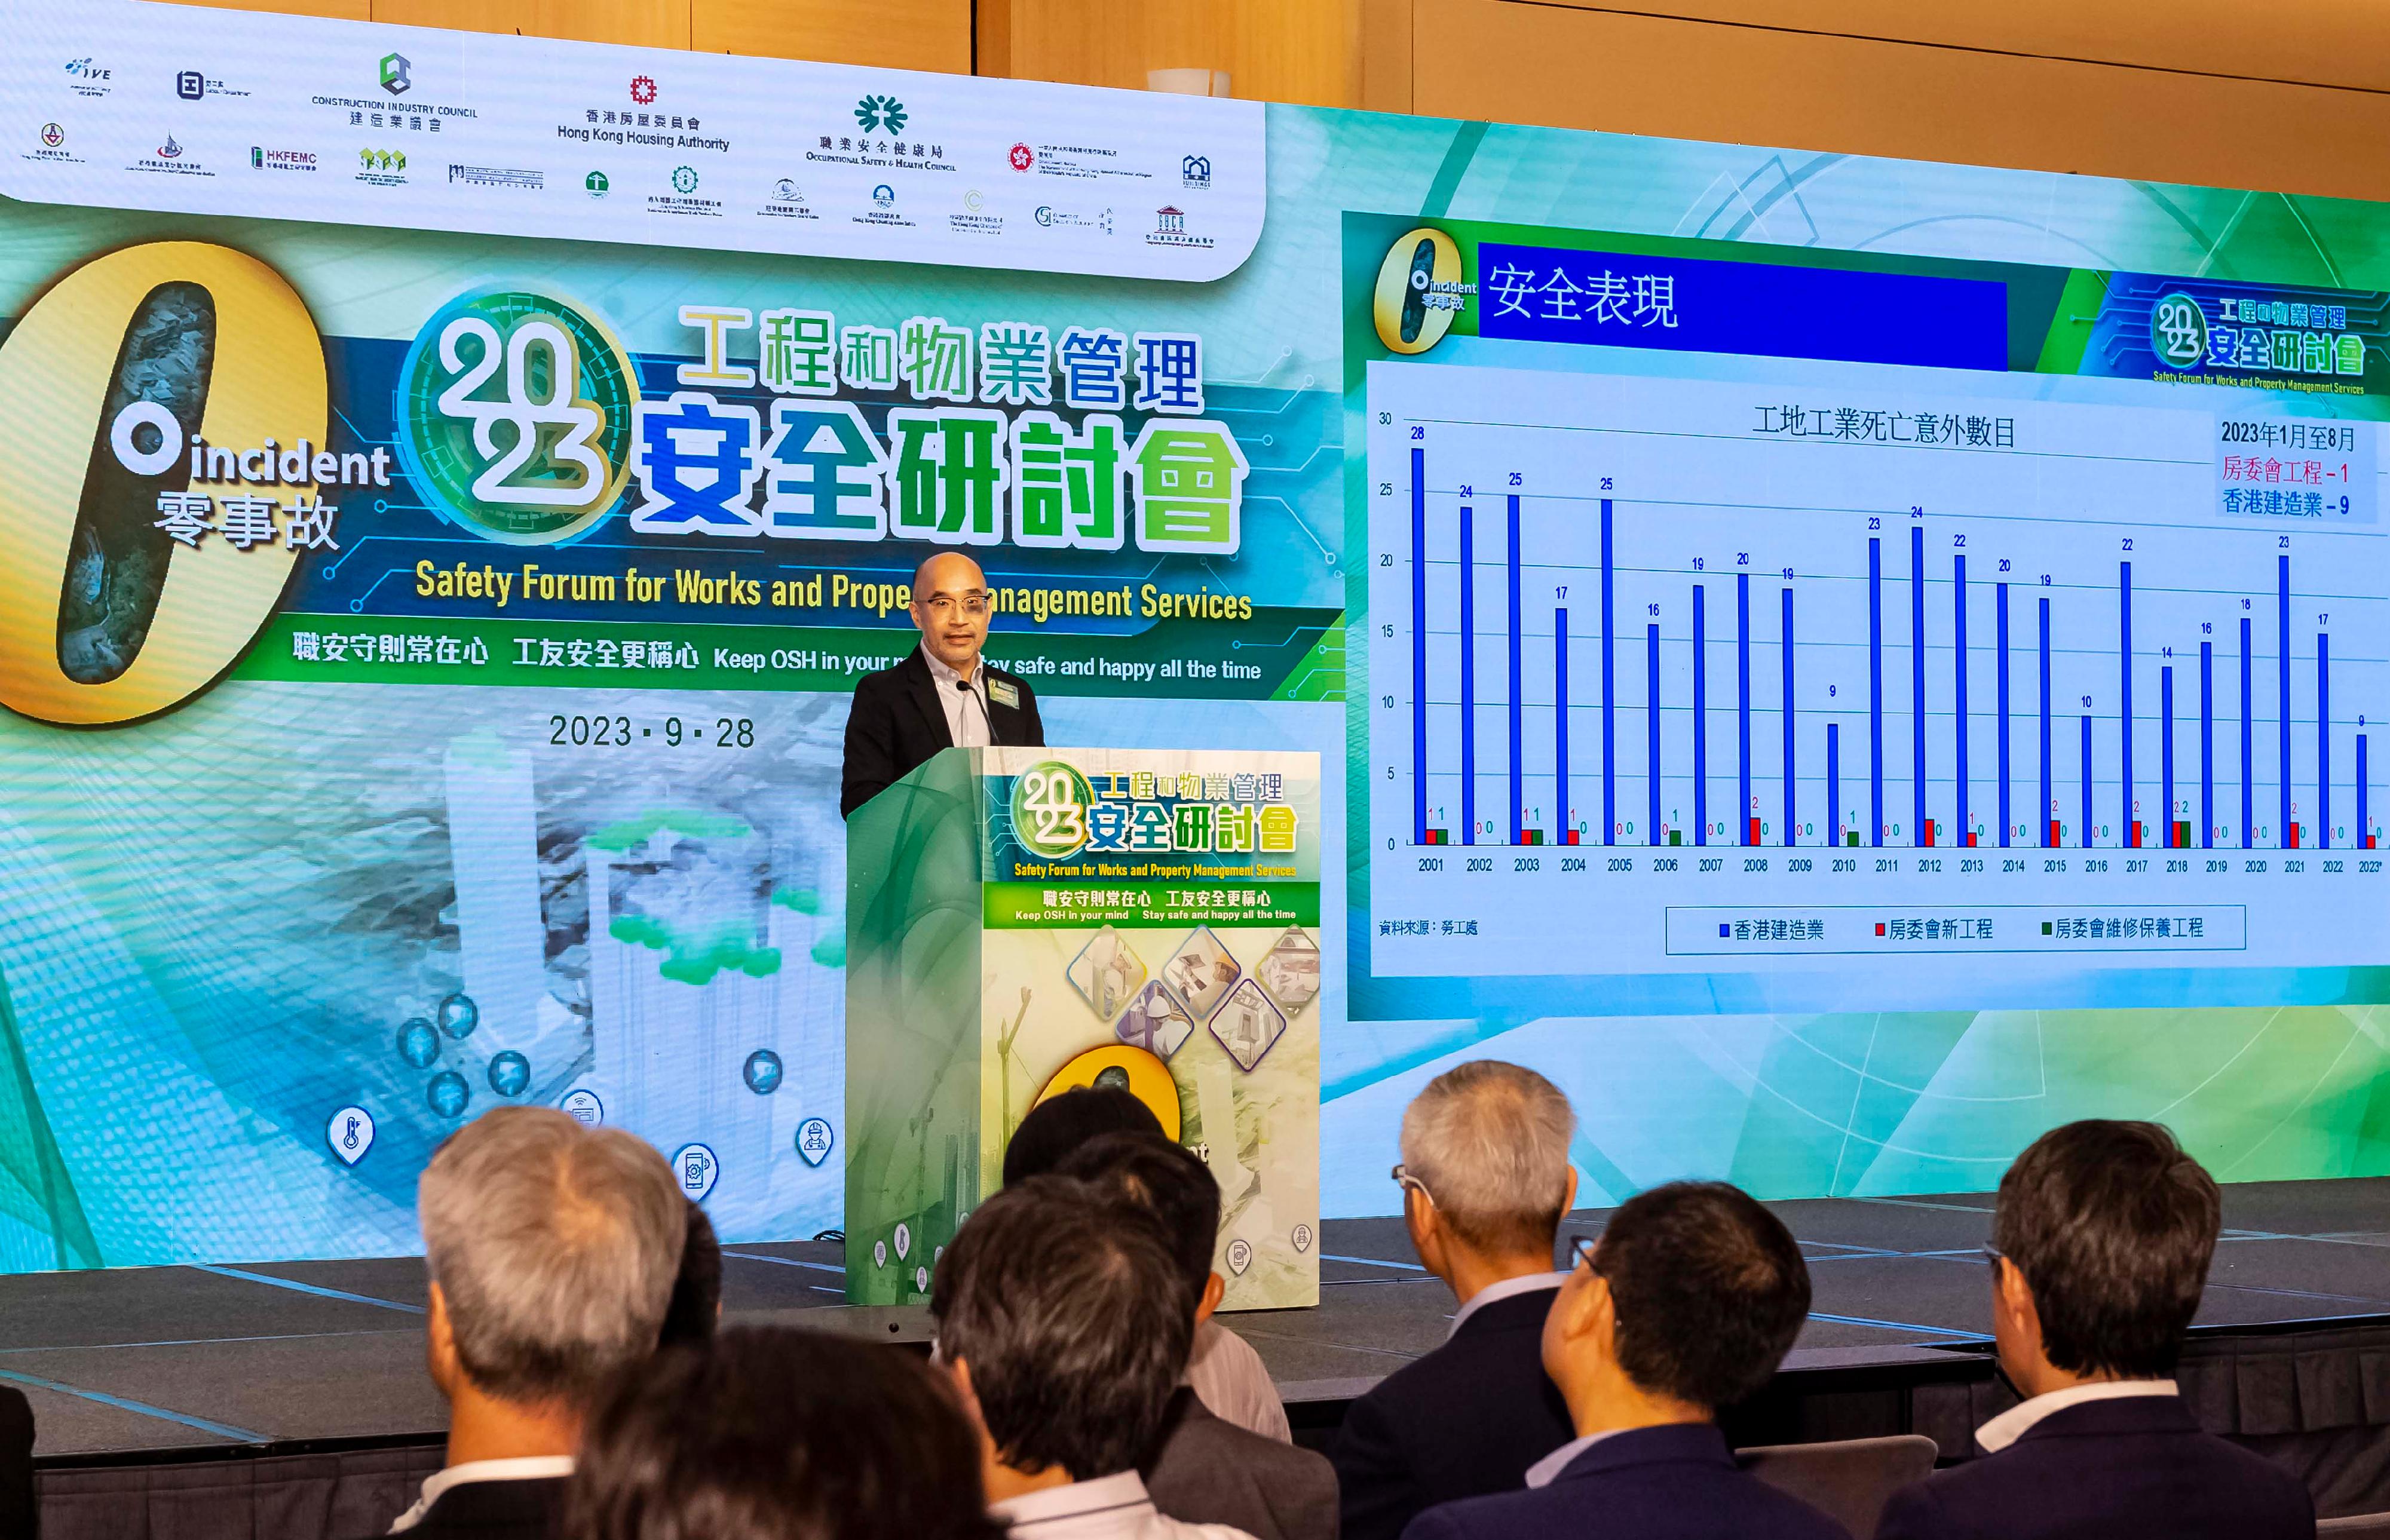 The Deputy Director of Housing (Development and Construction), Mr Stephen Leung, encouraged the industry at the Safety Forum for Works and Property Management Services 2023 held today (September 28) to utilise innovative methods to address various challenges and leverage technology to enhance construction site safety management.